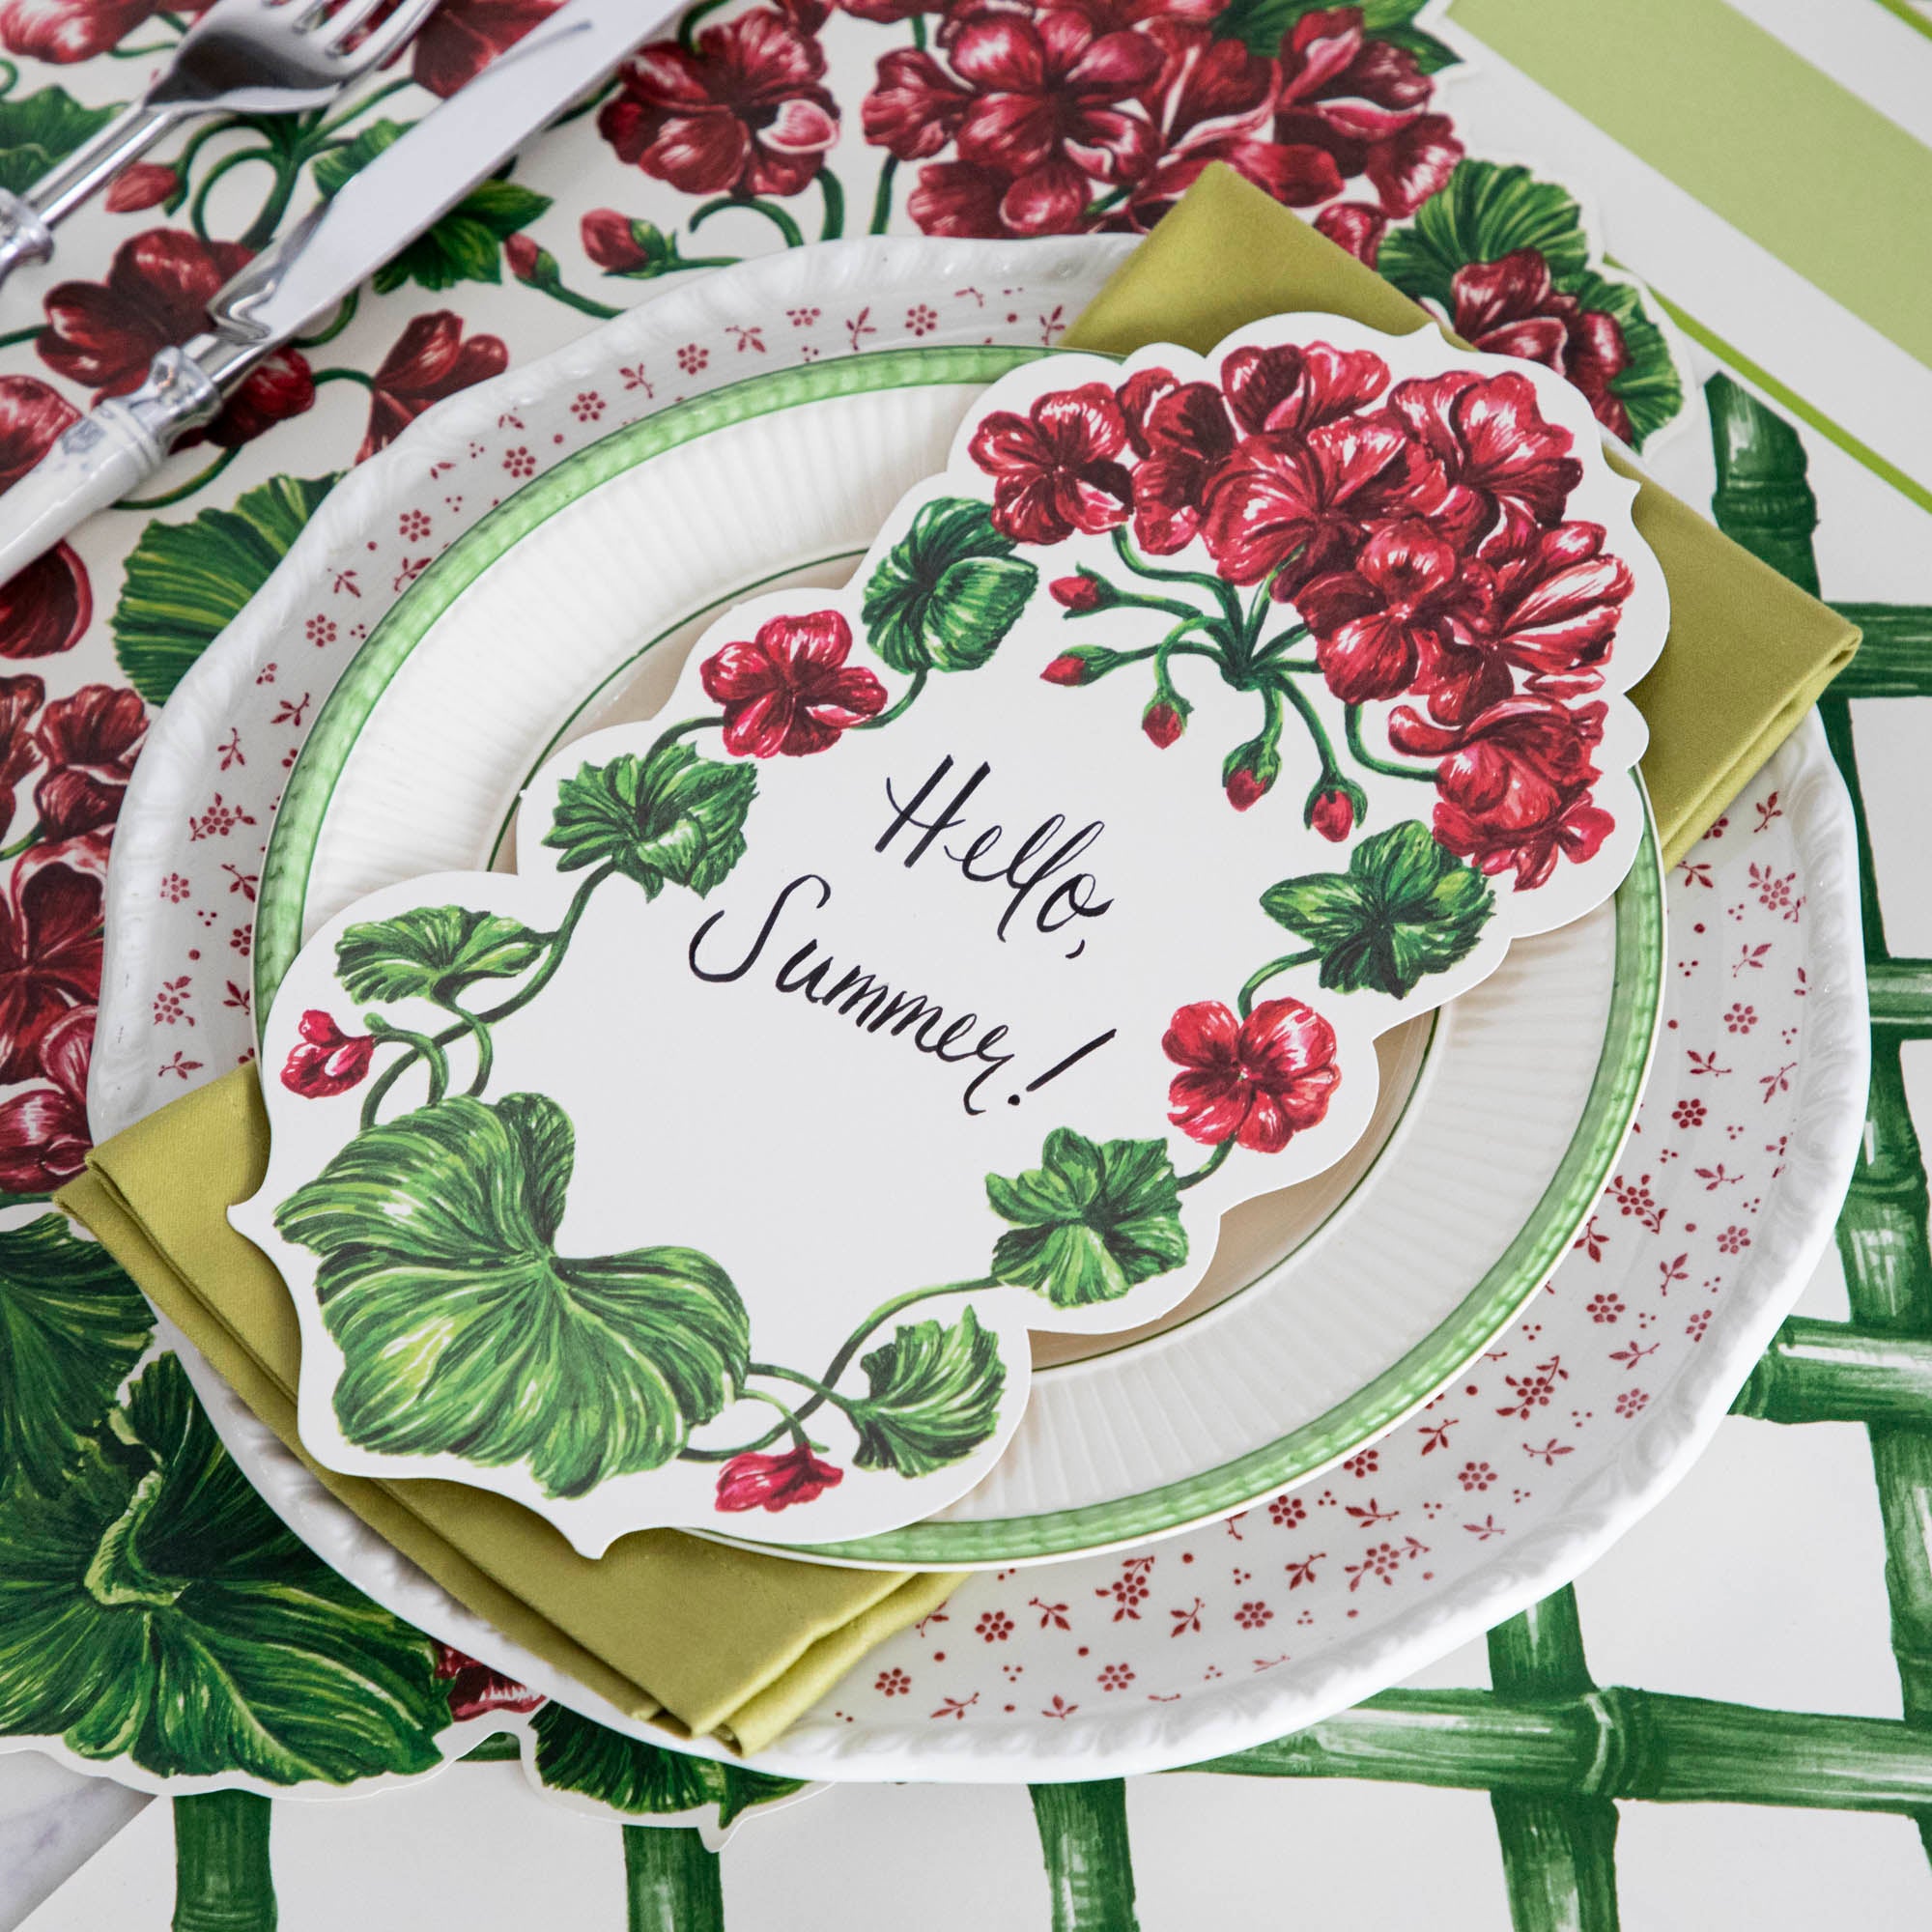 Close-up of the Green Lattice Placemat under an elegant place setting.